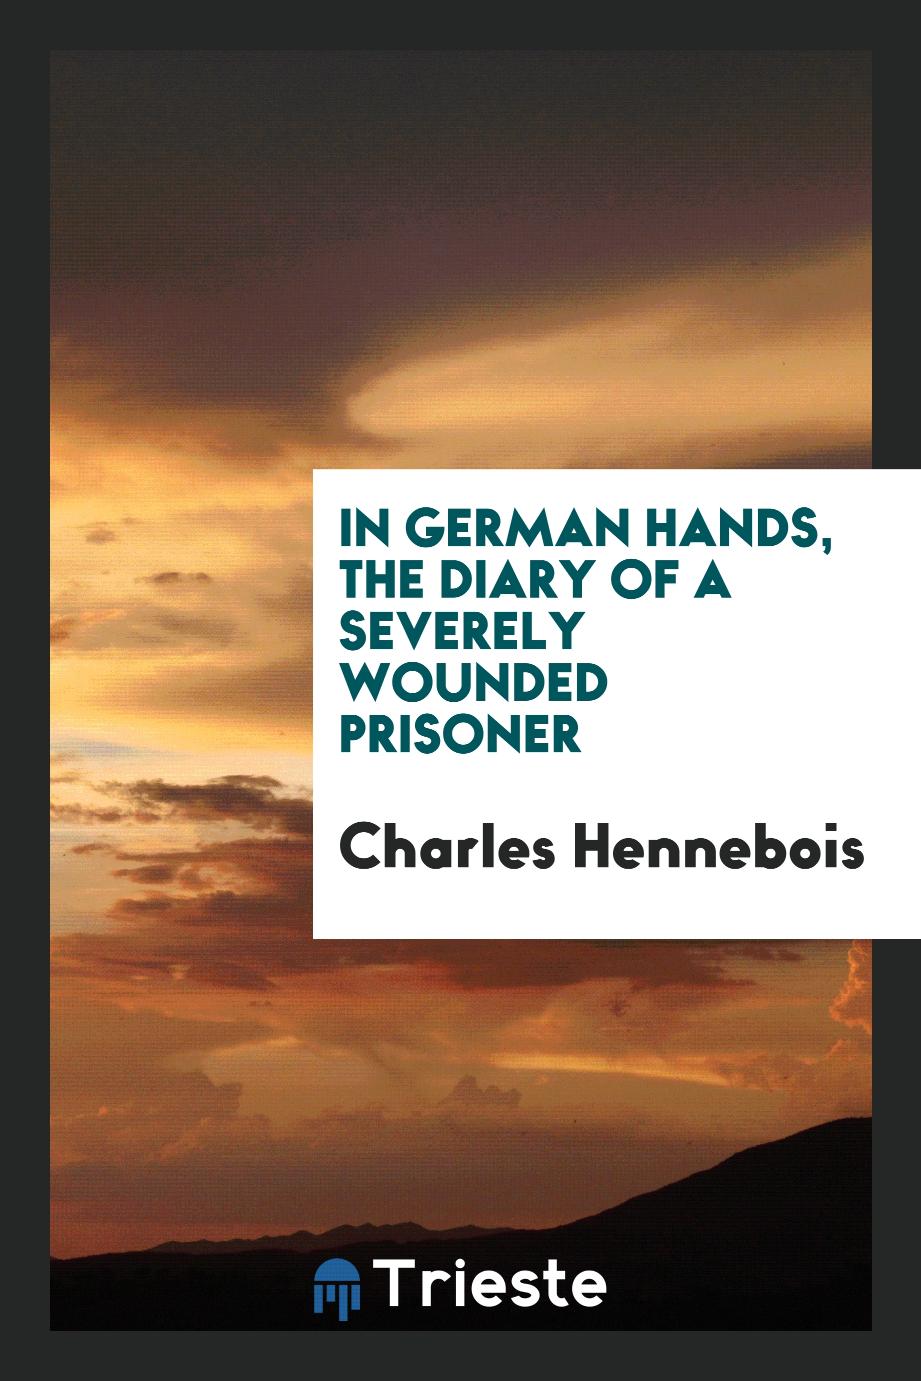 In German hands, the diary of a severely wounded prisoner